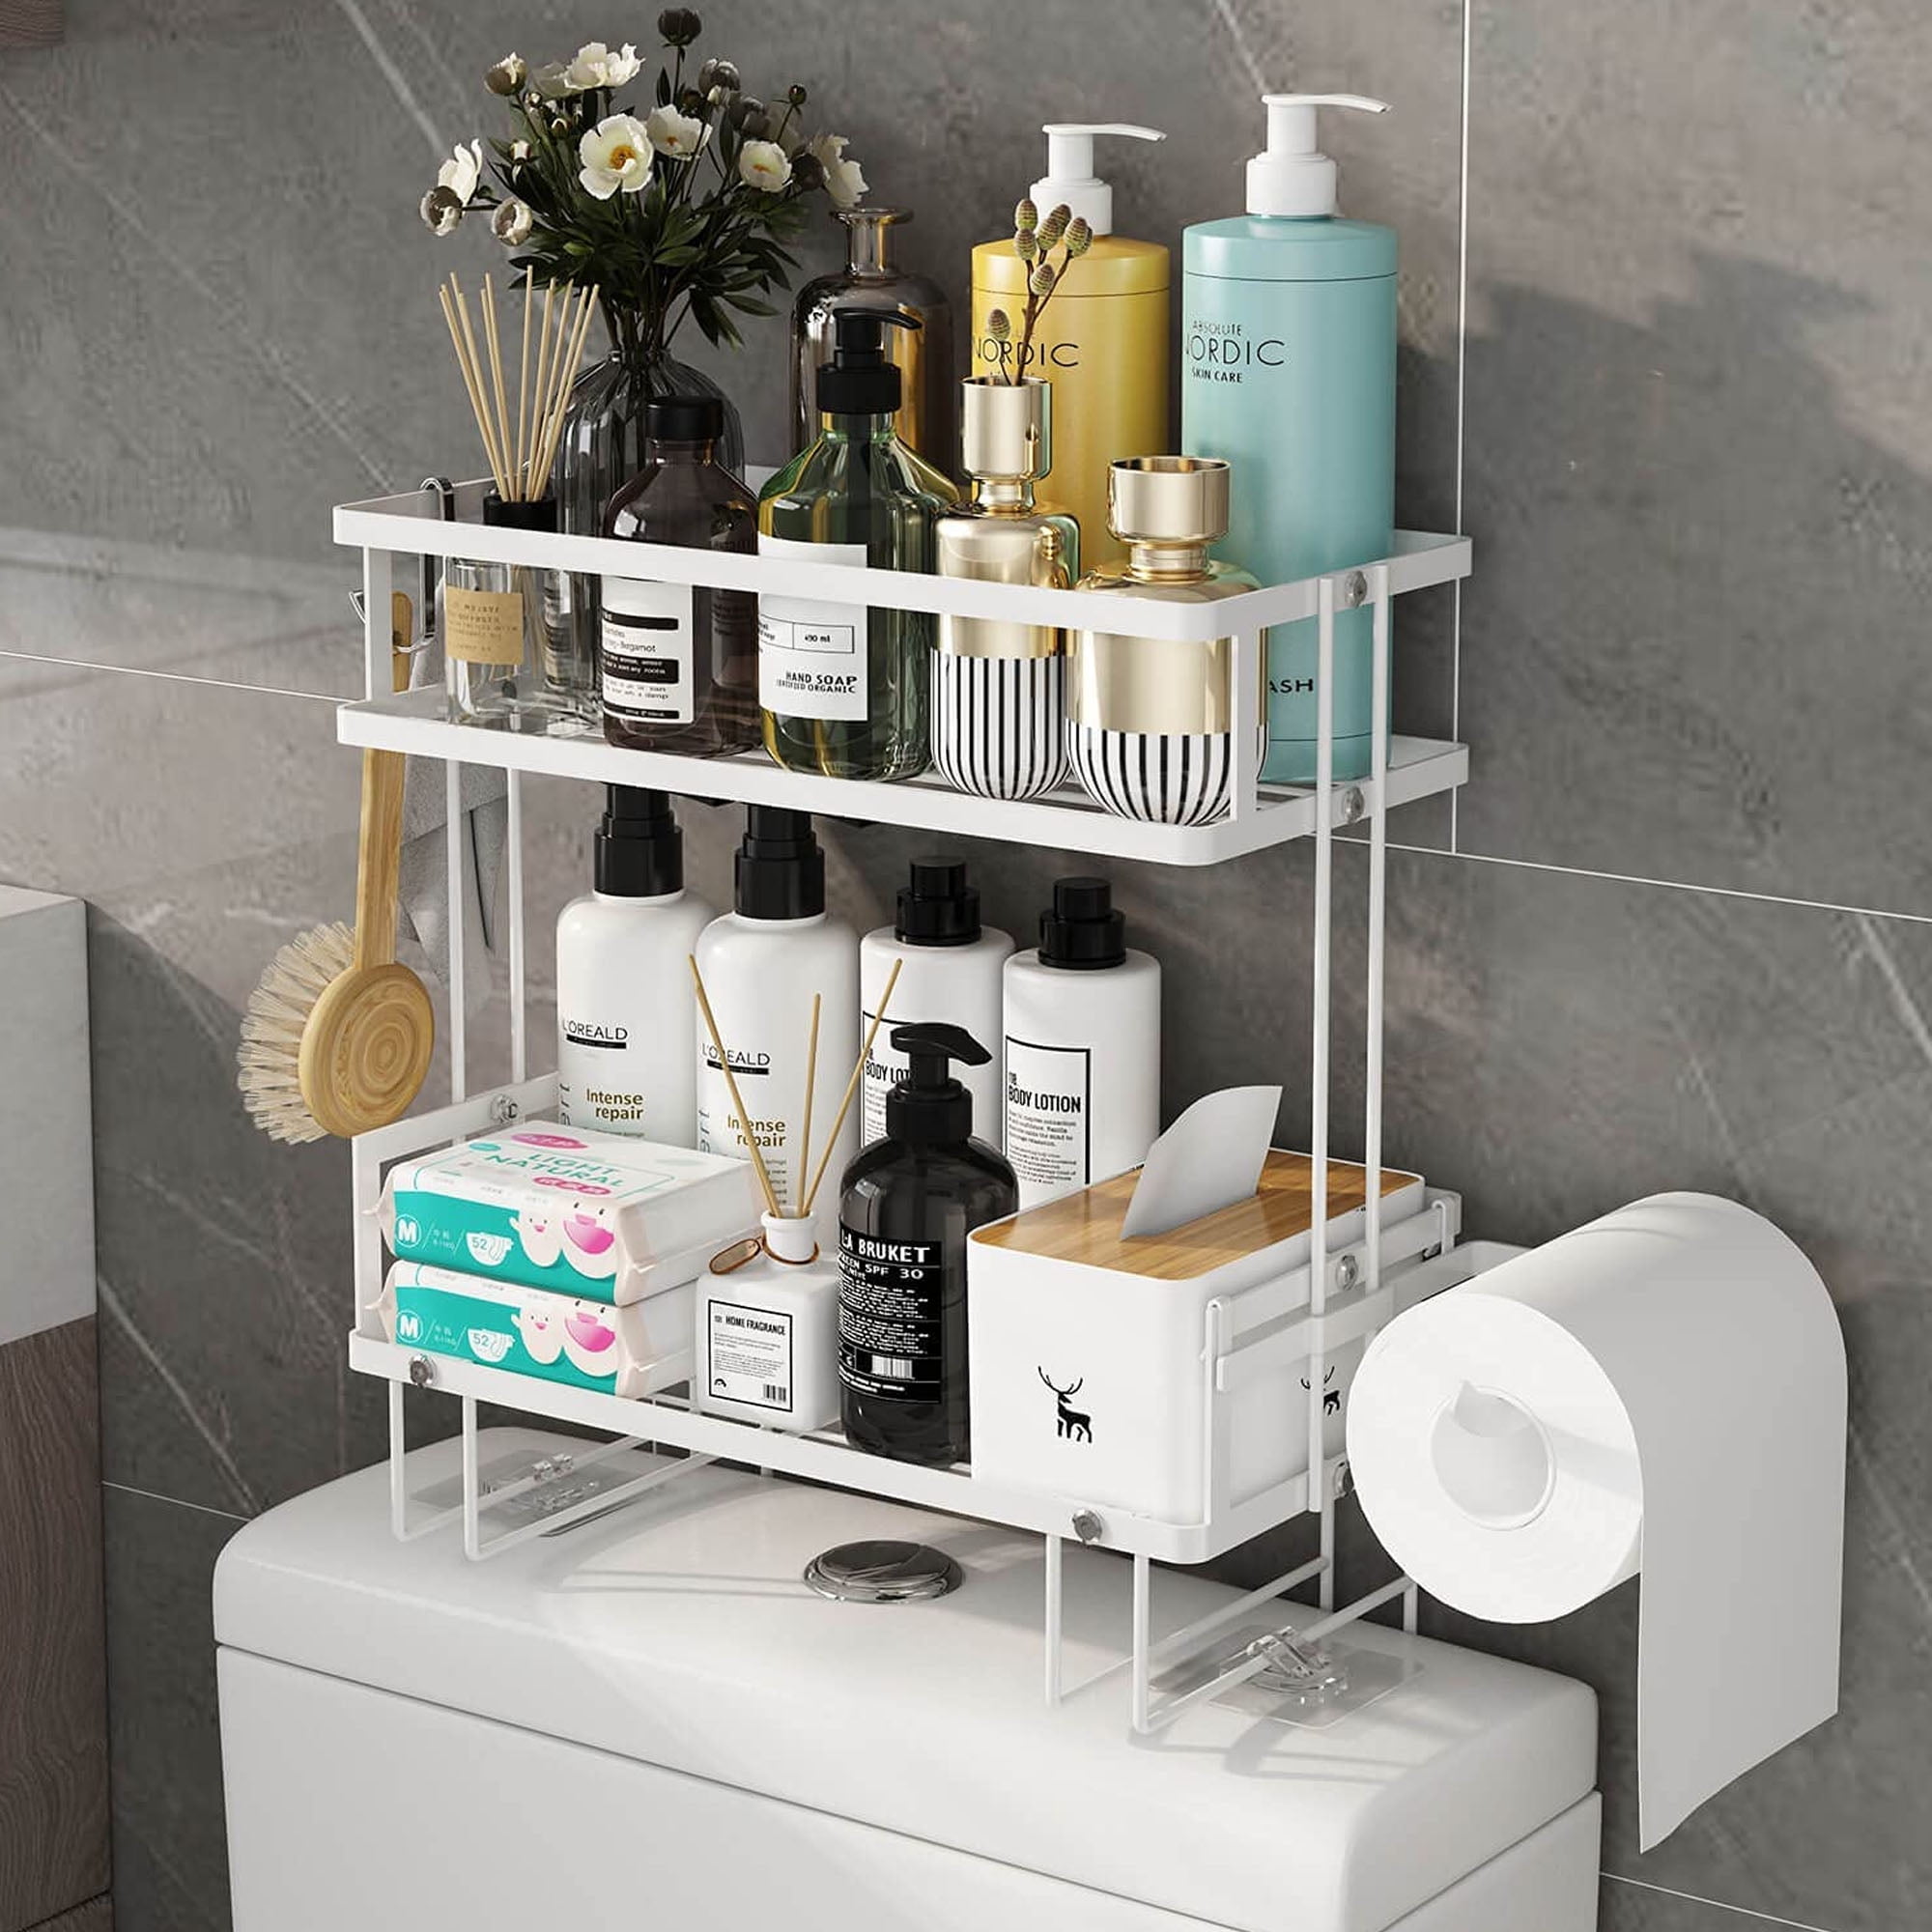 Werseon 2-Tier Over The Toilet Storage, Bathroom Organizers and Storage, Organizer Shelves for Bathroom, Size: 2 Tier, White